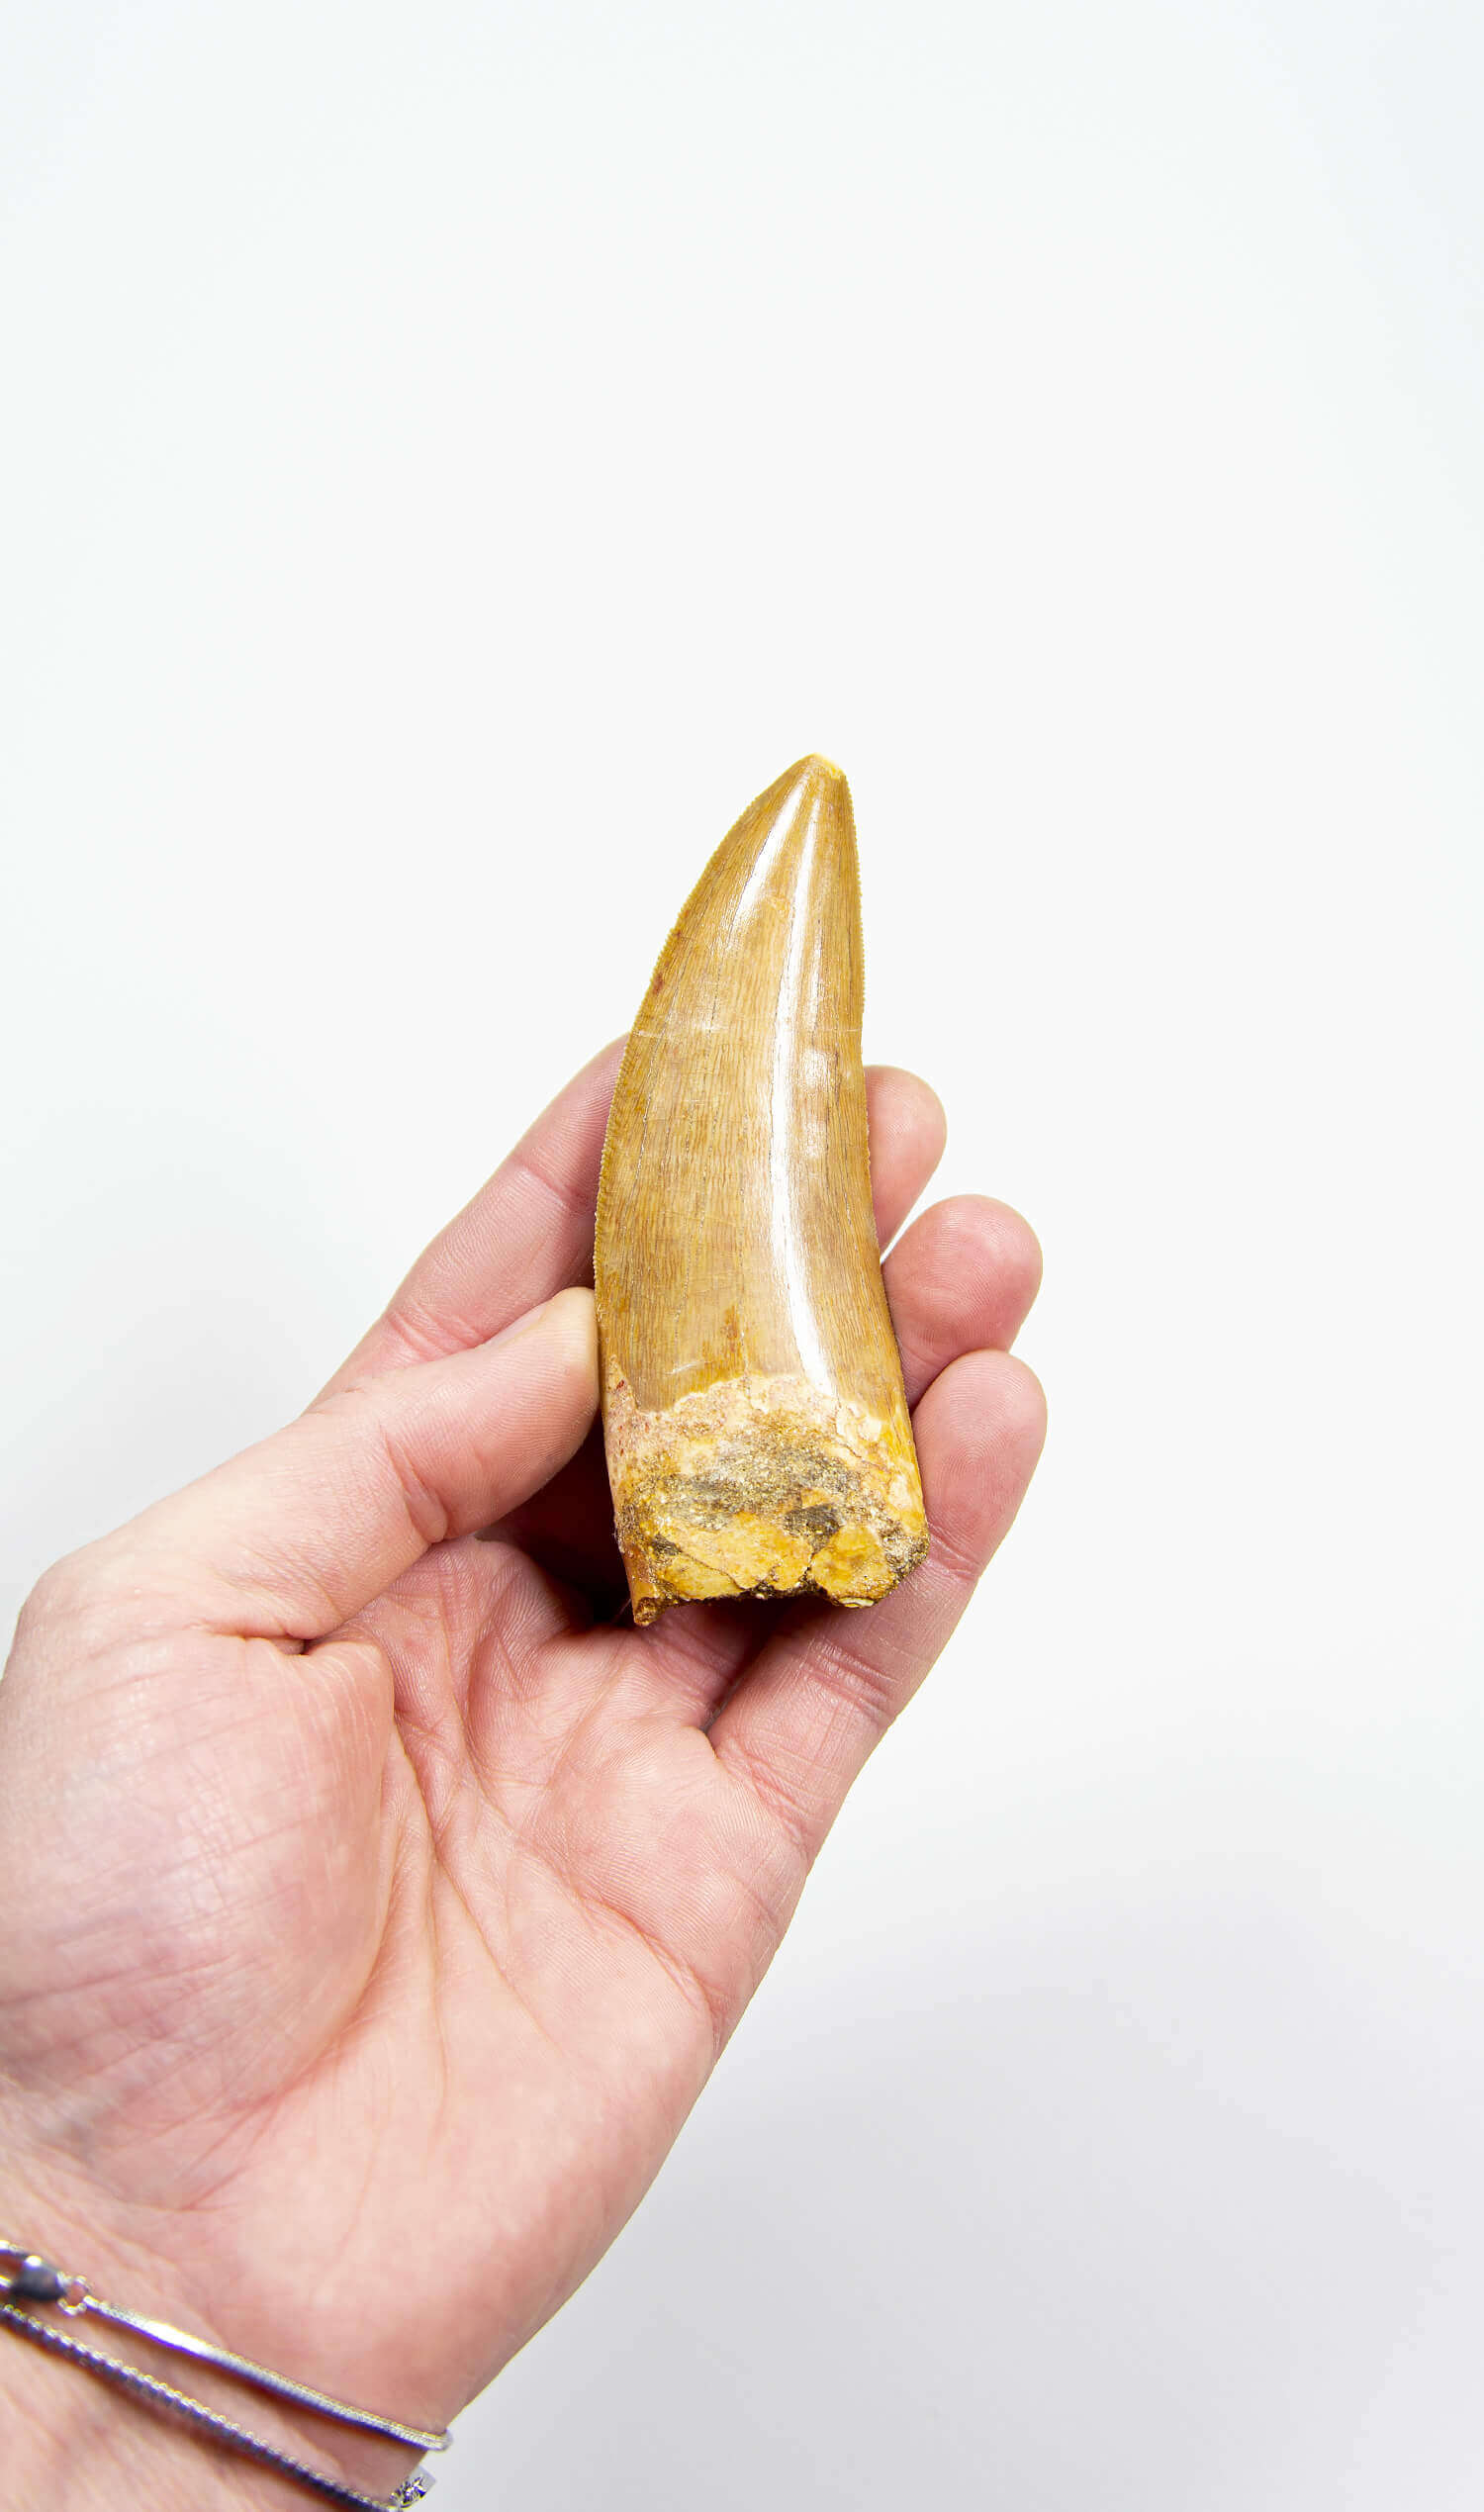 real fossil dinosaur carcharodontosaurus tooth for sale at the uk fossil store 75